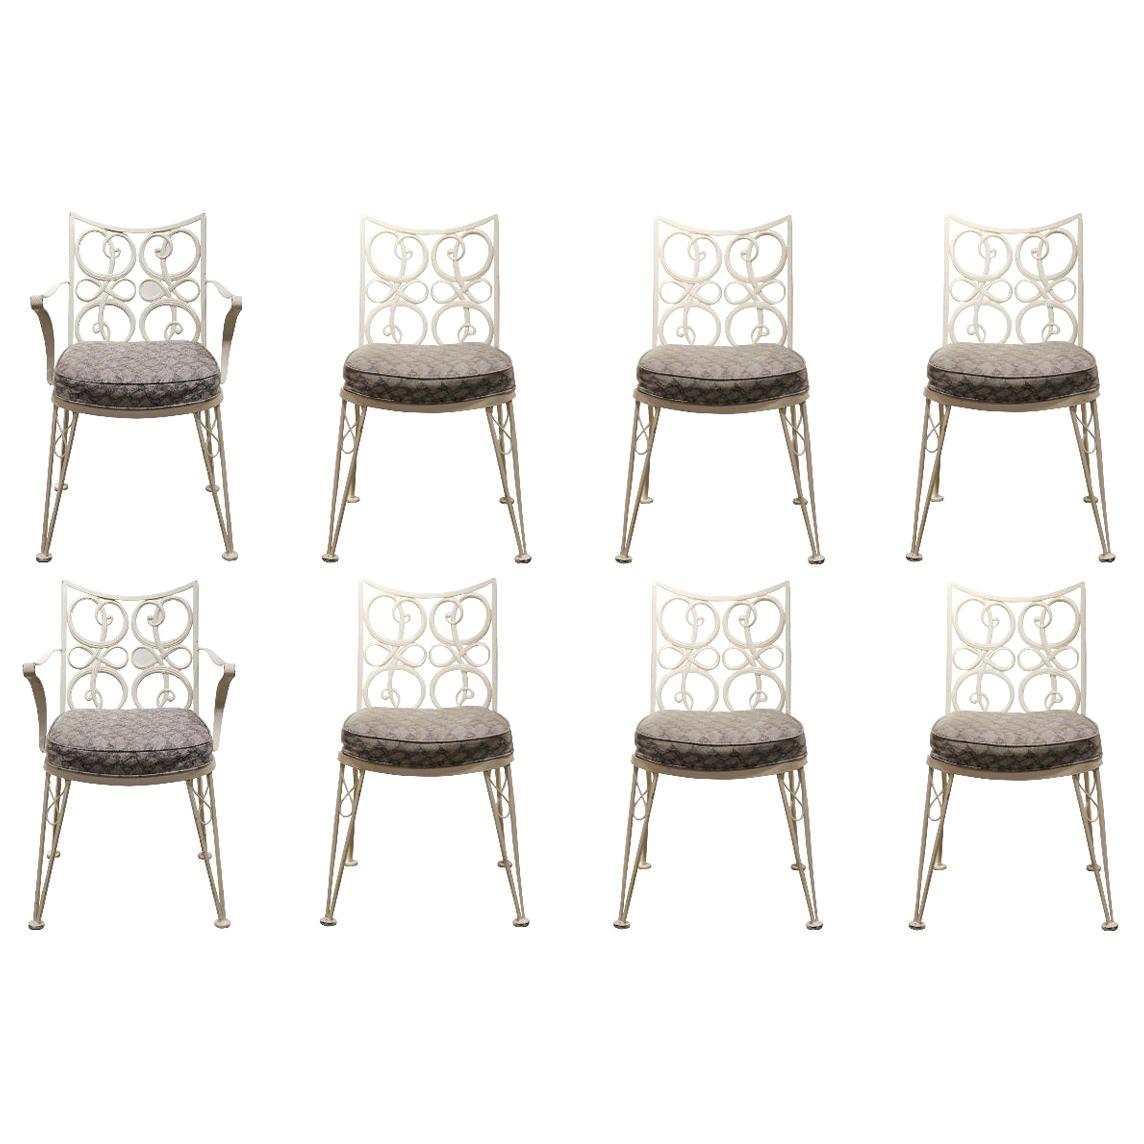 Set of Eight White Scroll Modern Outdoor / Patio Chairs